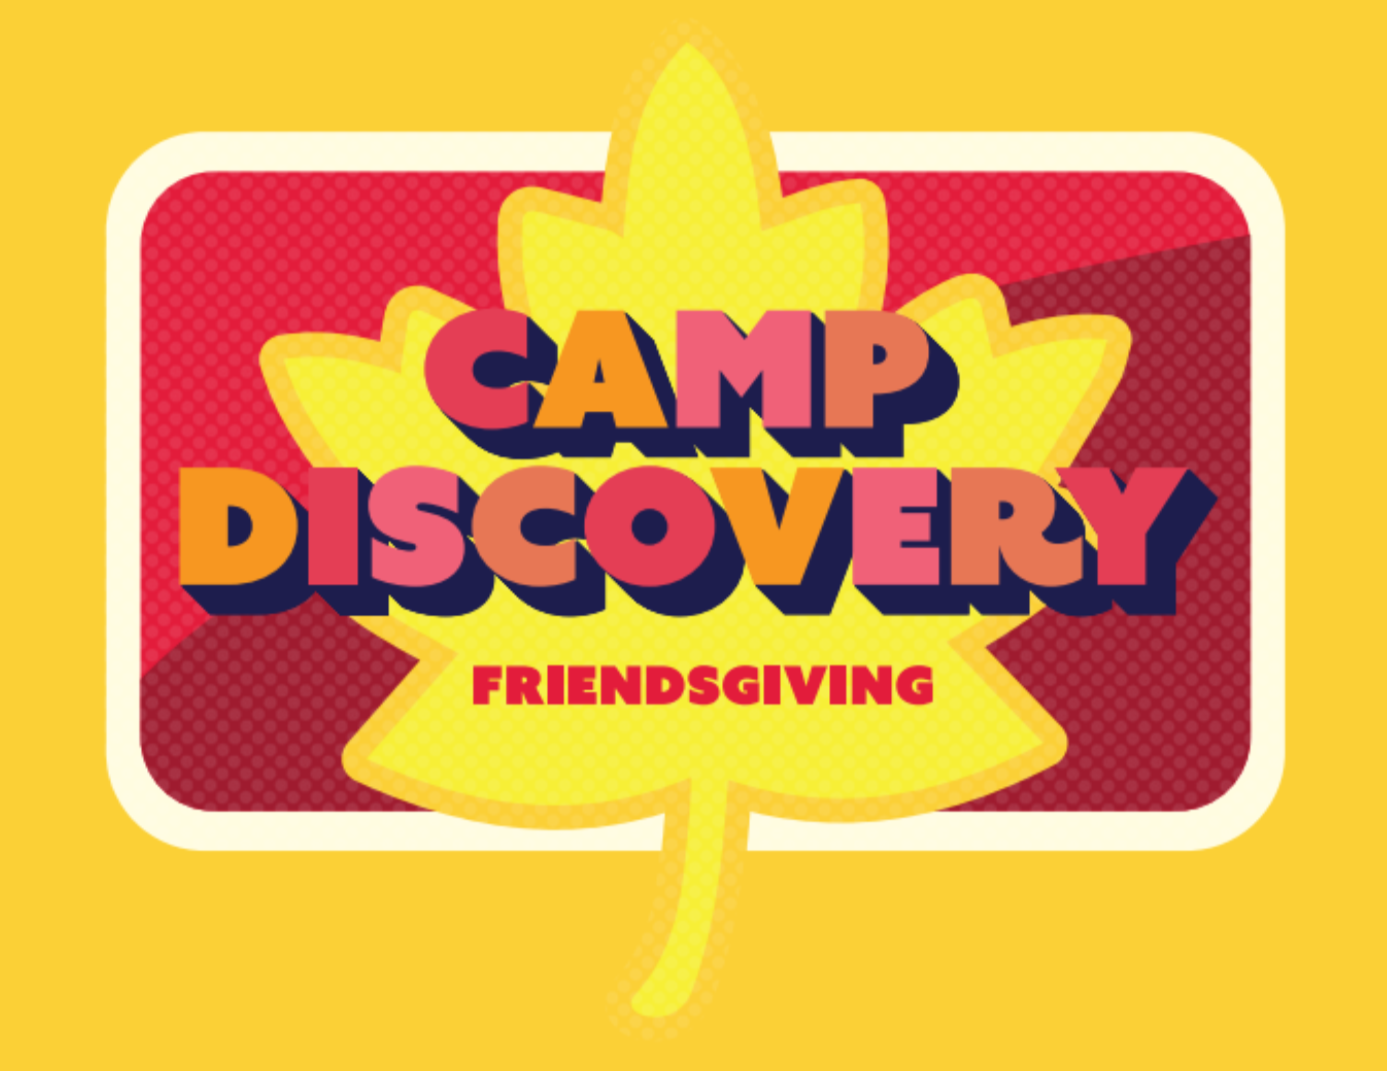 Camp Discovery Friendsgiving